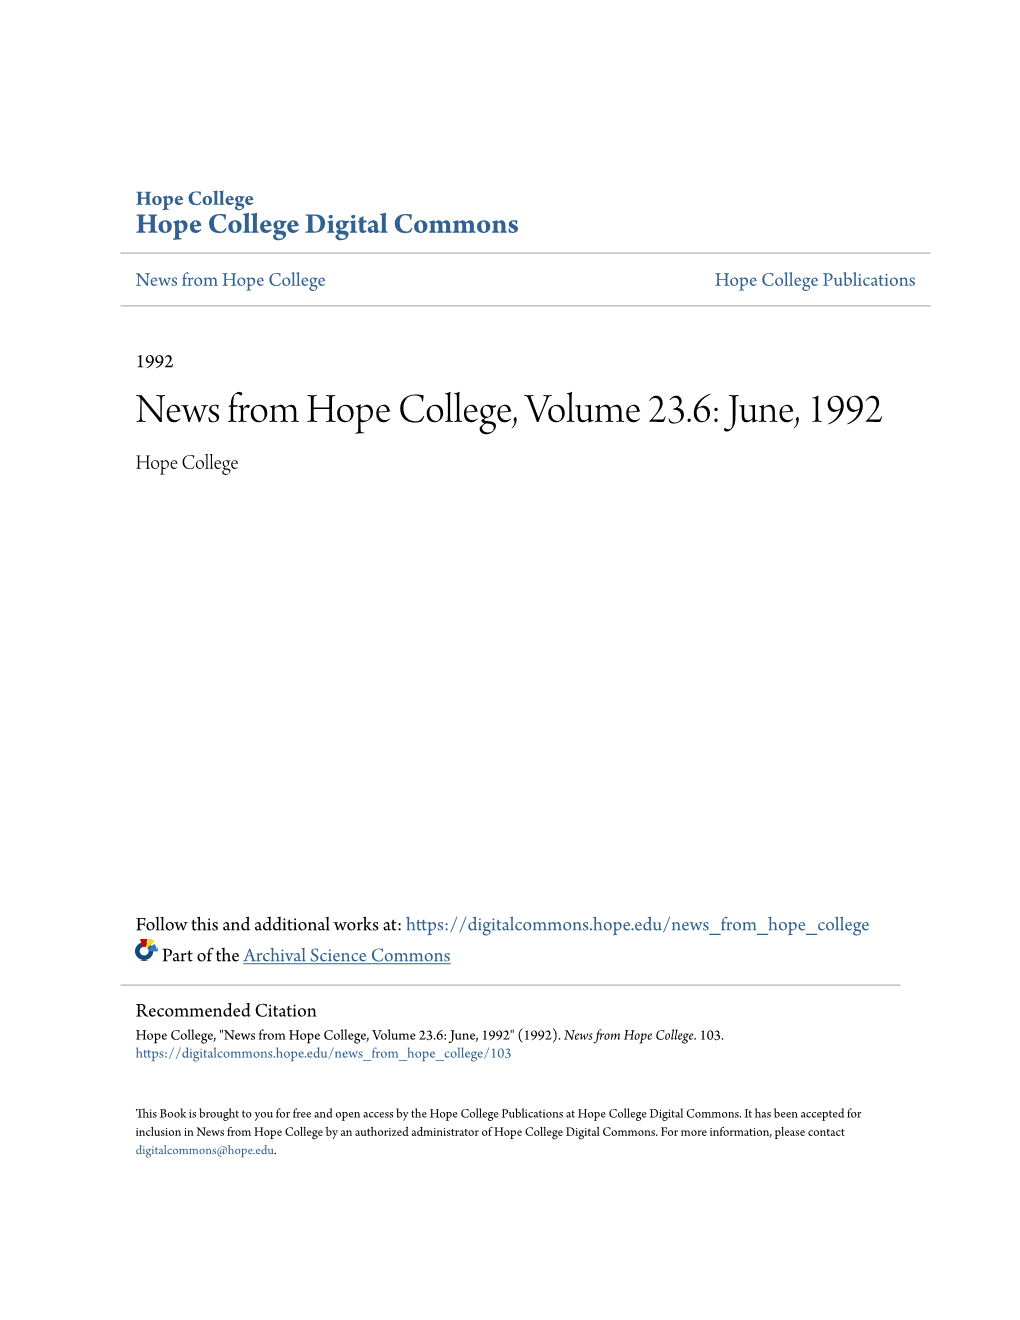 News from Hope College, Volume 23.6: June, 1992 Hope College